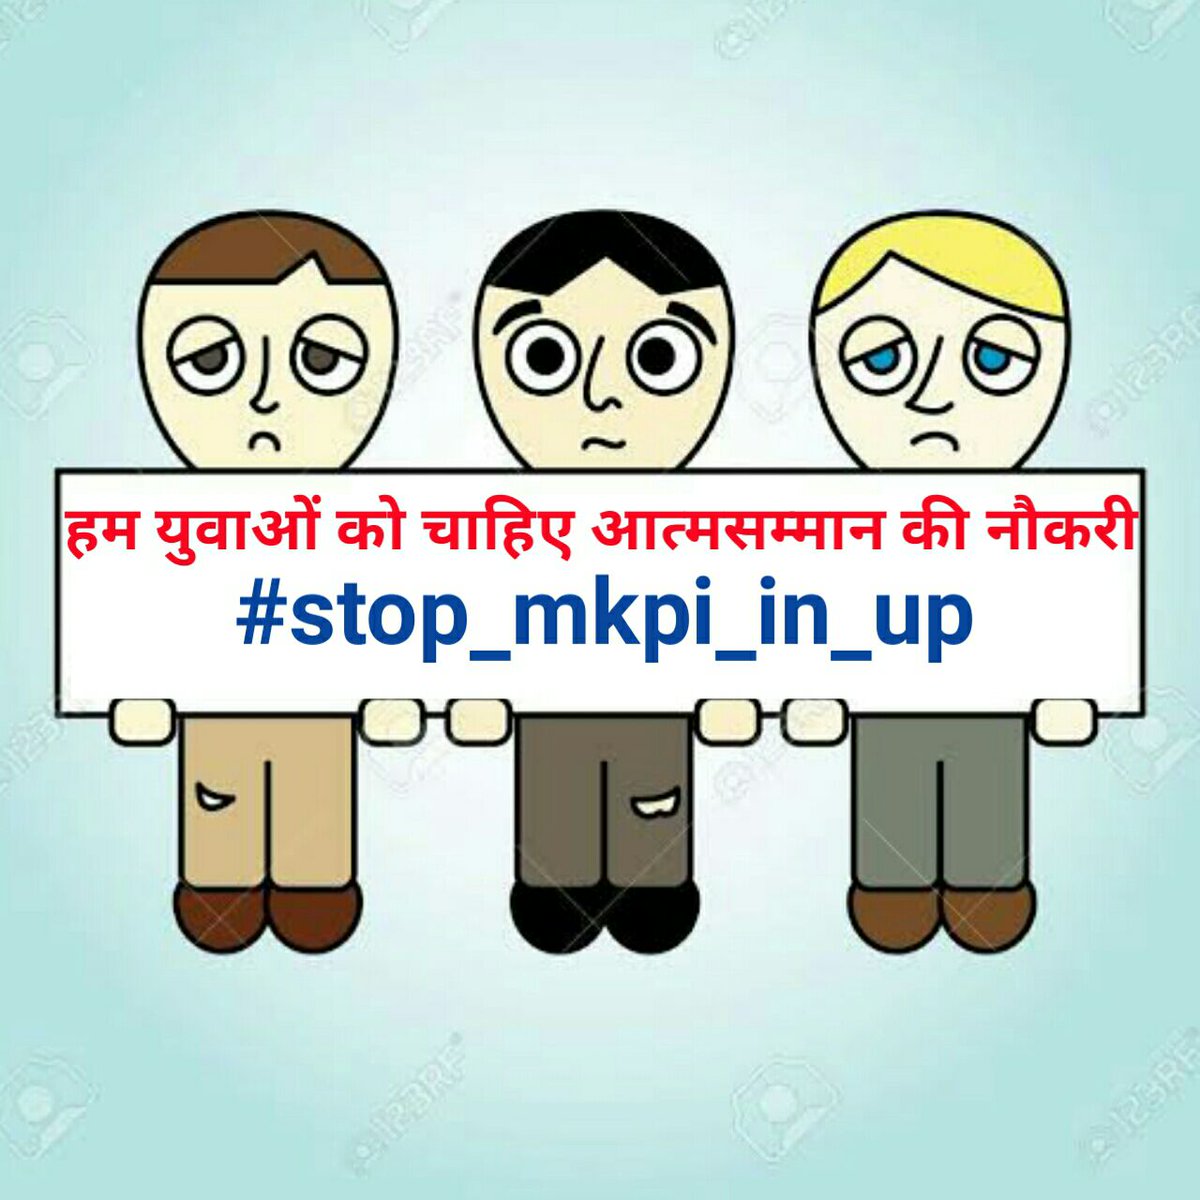 #योगीजी_नही_चाहिये_संविदा By applying one rule after another, you are distracting us from the right issue.We all students will never forgive you for this. @MG69K
@myogioffice #stop_mkpi_in_up

#69k_SelectedWantsJoining